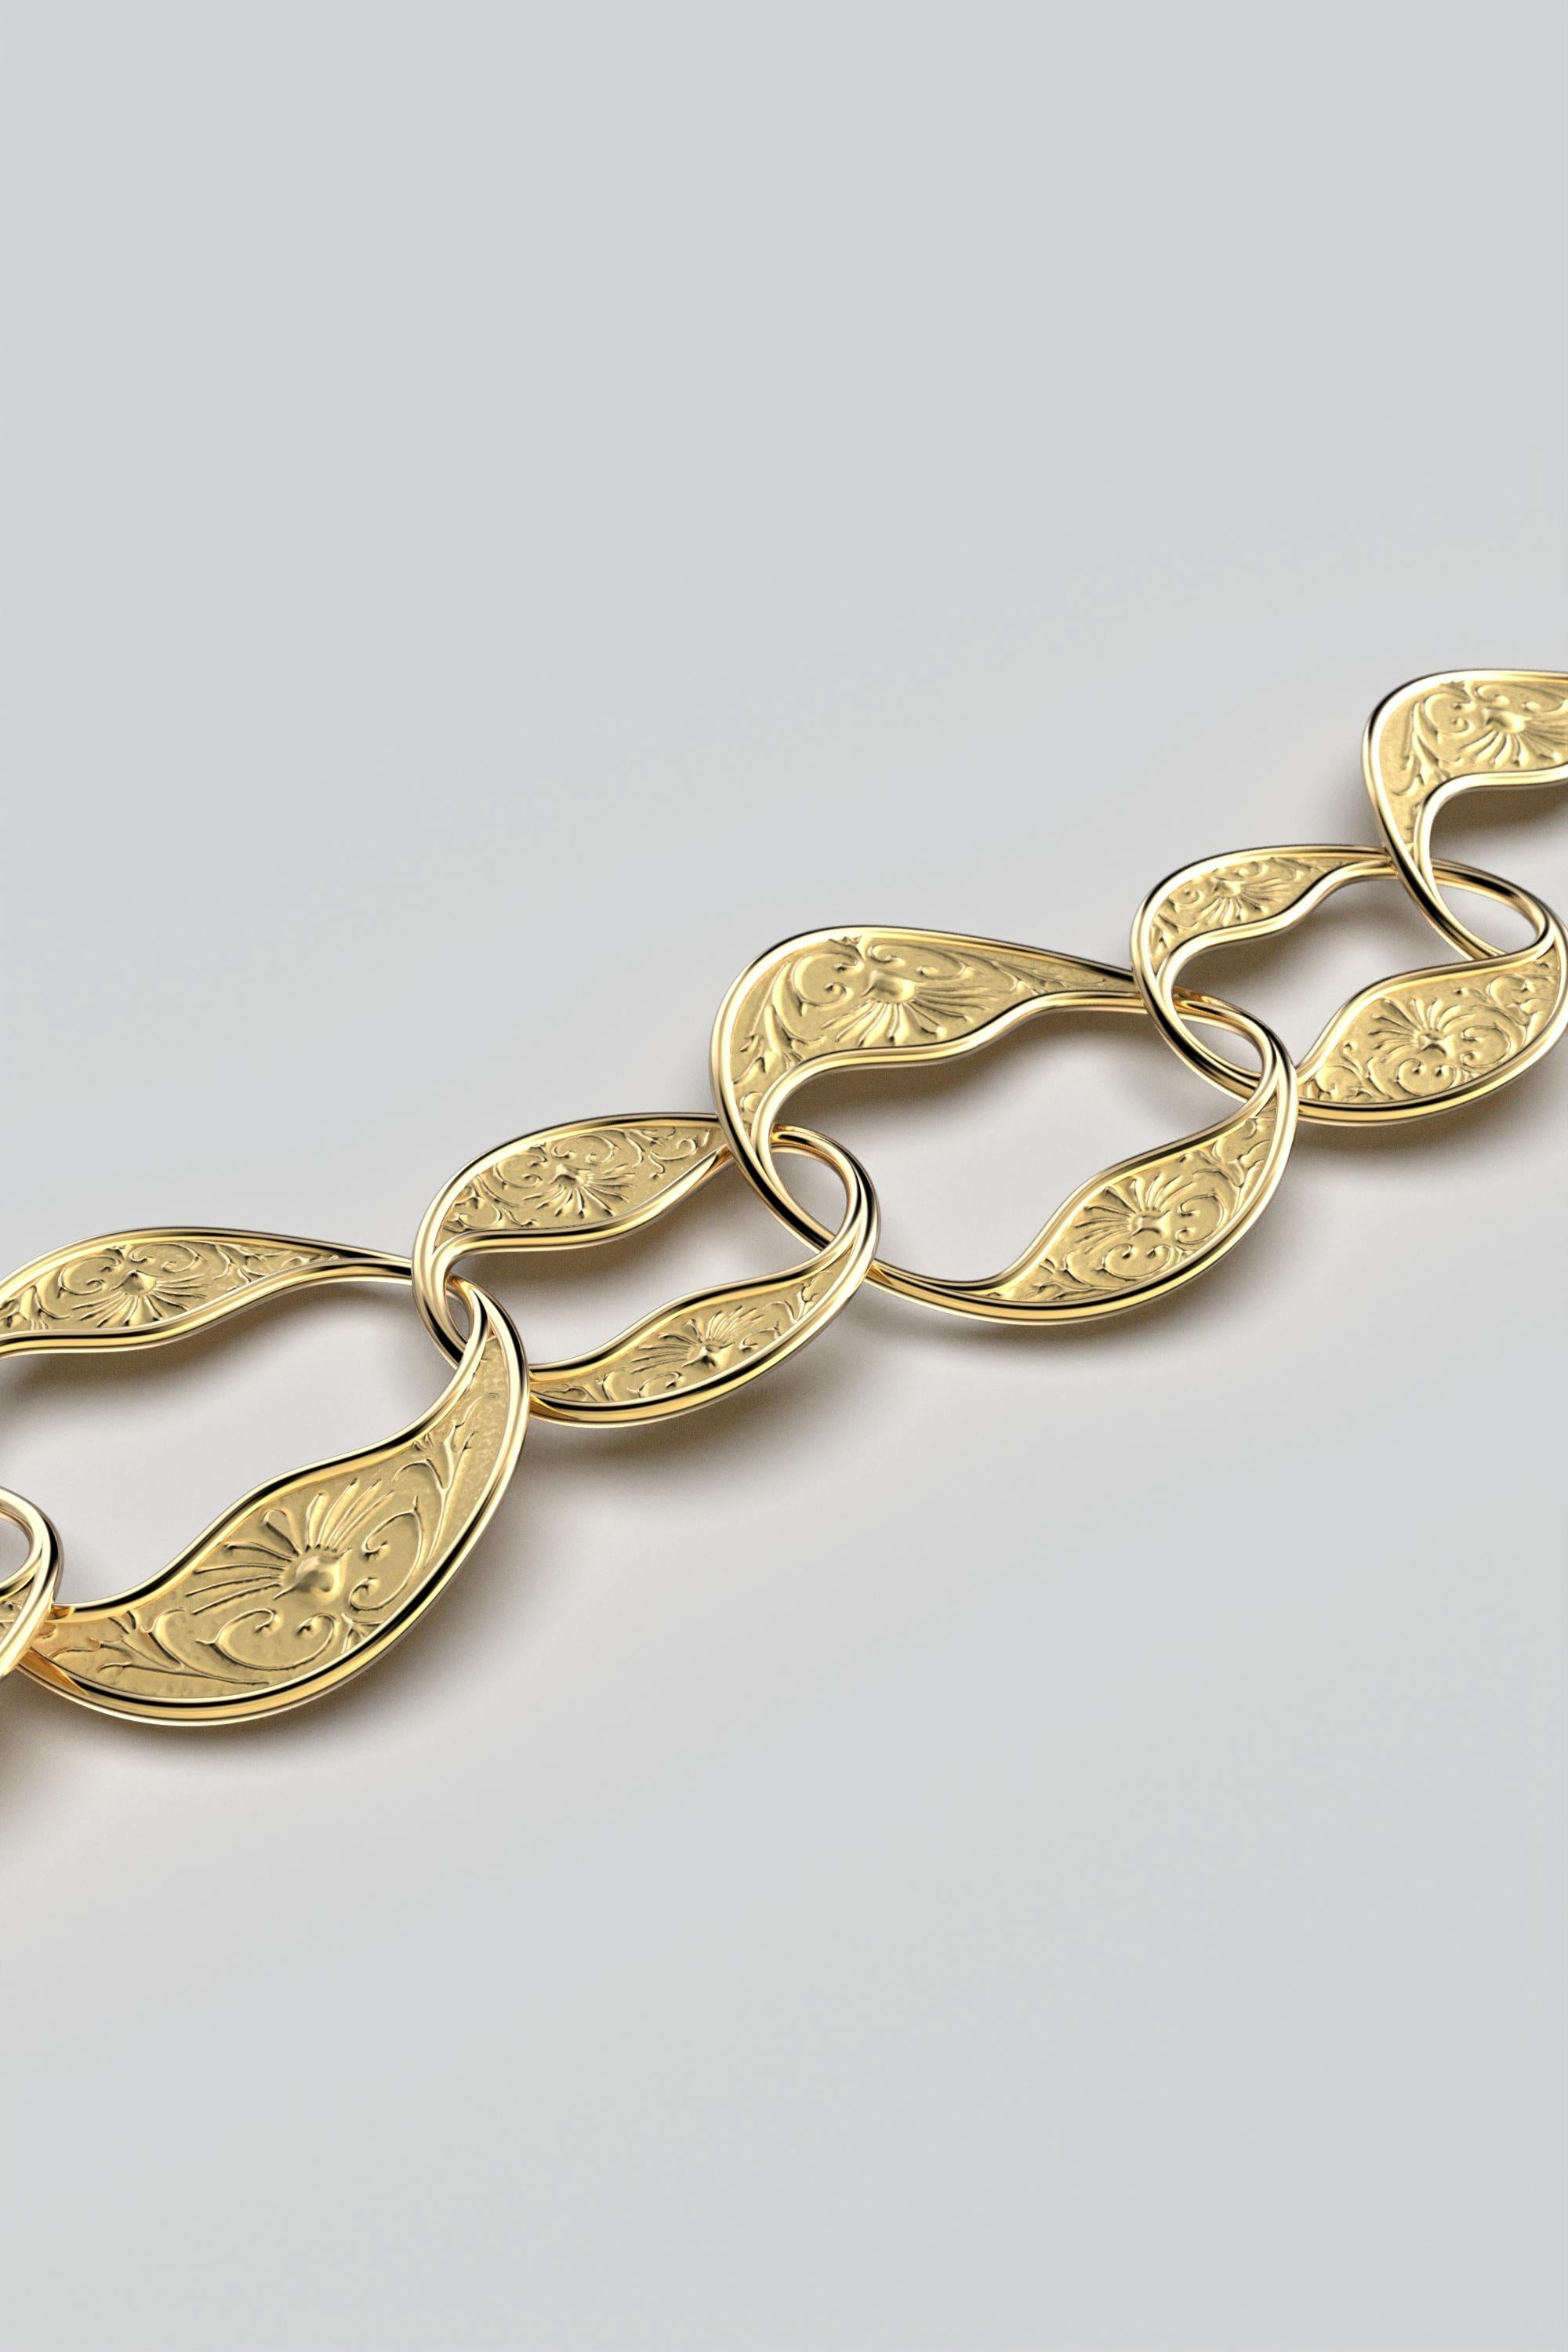 18k Gold Link Bracelet in Baroque Style | Made in Italy by Oltremare Gioielli For Sale 3